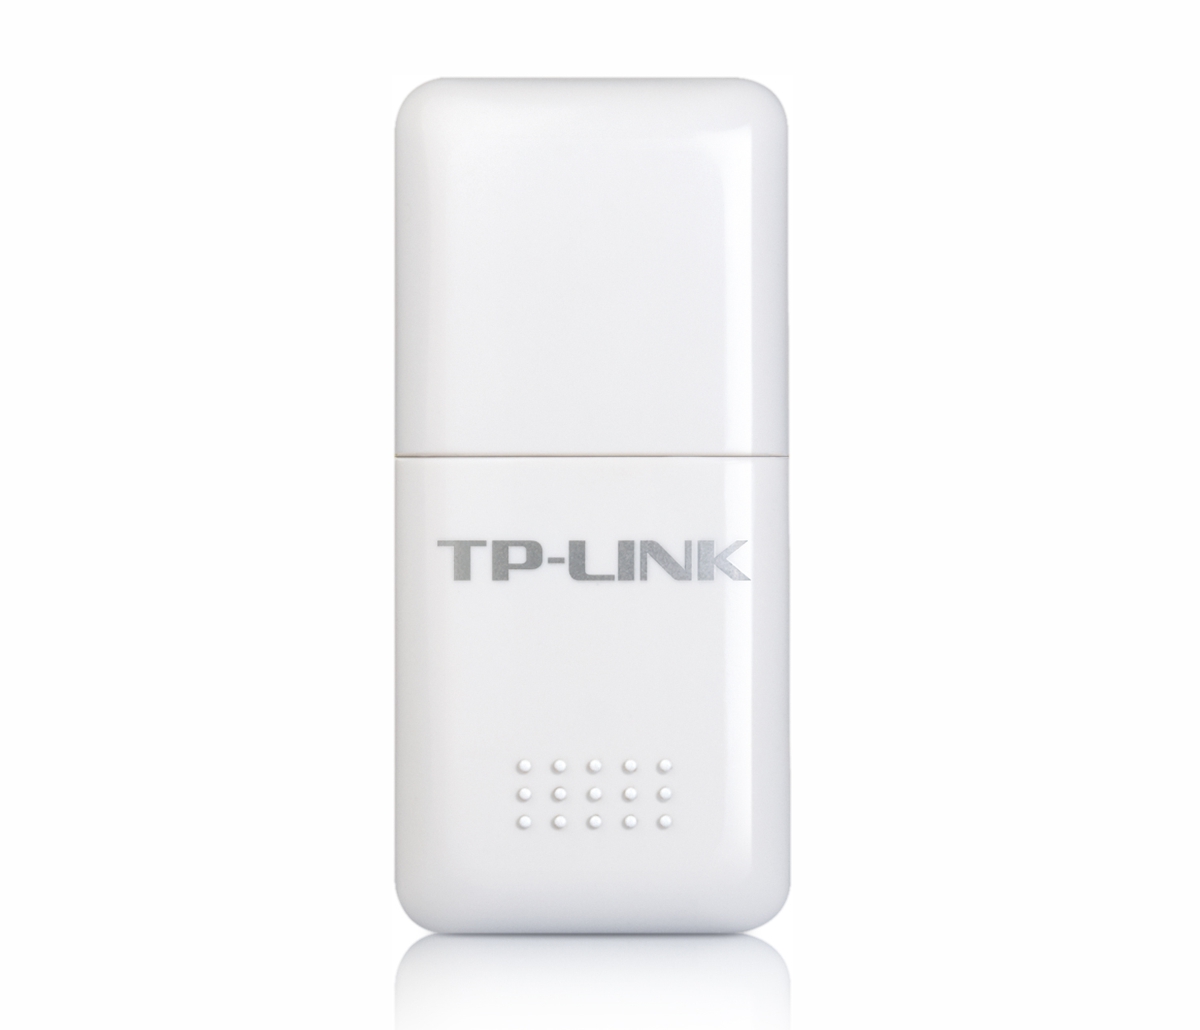 Rtl8188s Wlan Adapter Driver Xp Download